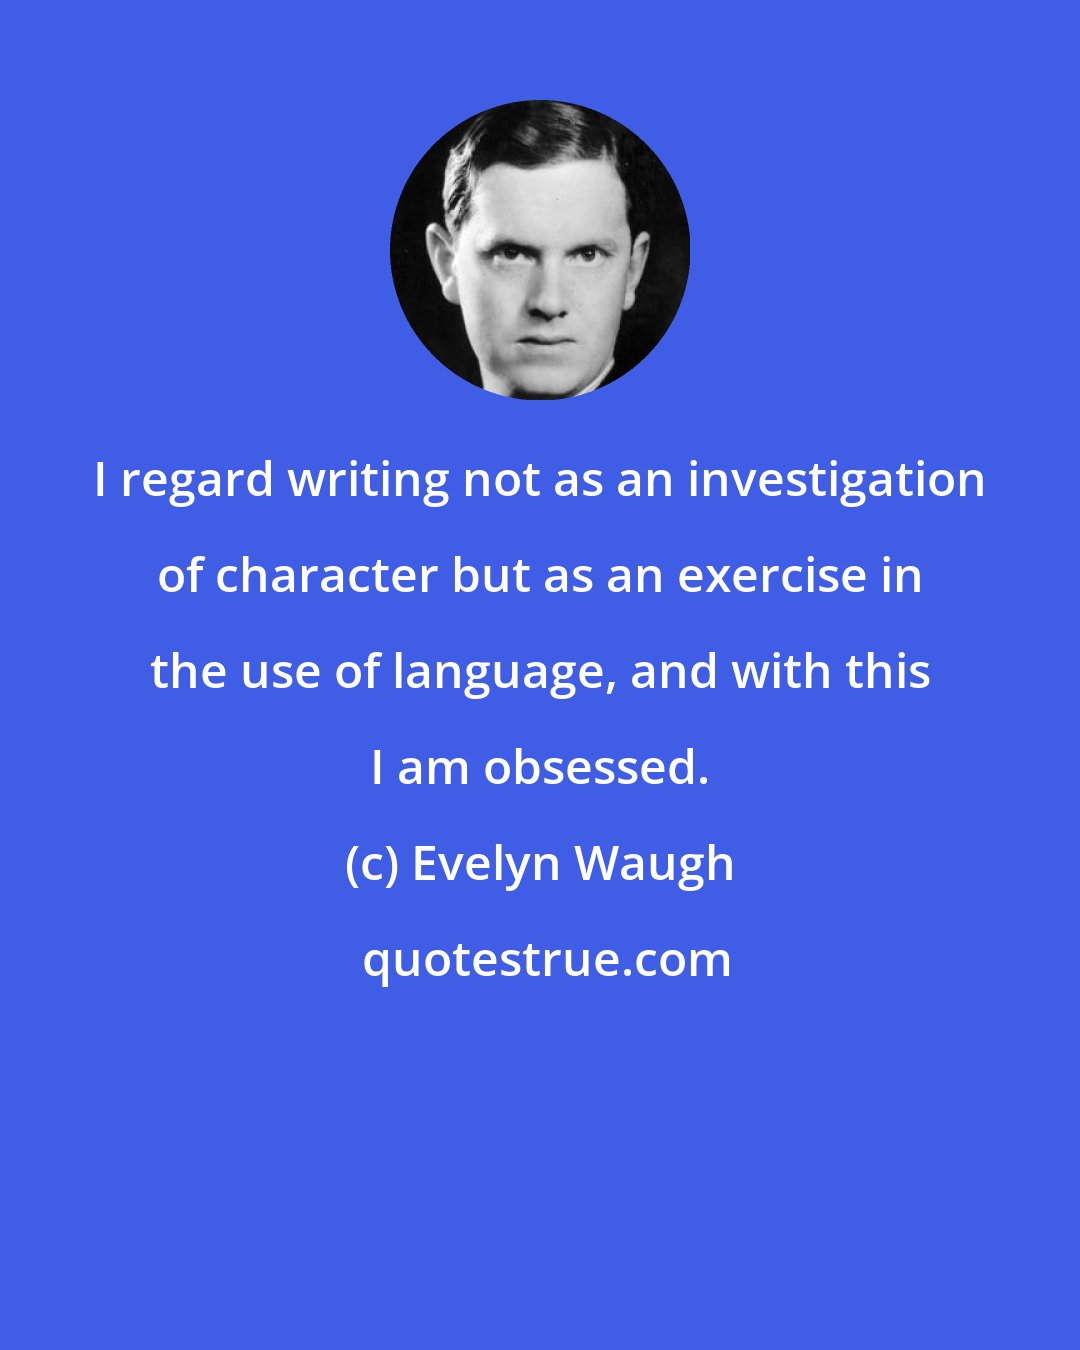 Evelyn Waugh: I regard writing not as an investigation of character but as an exercise in the use of language, and with this I am obsessed.